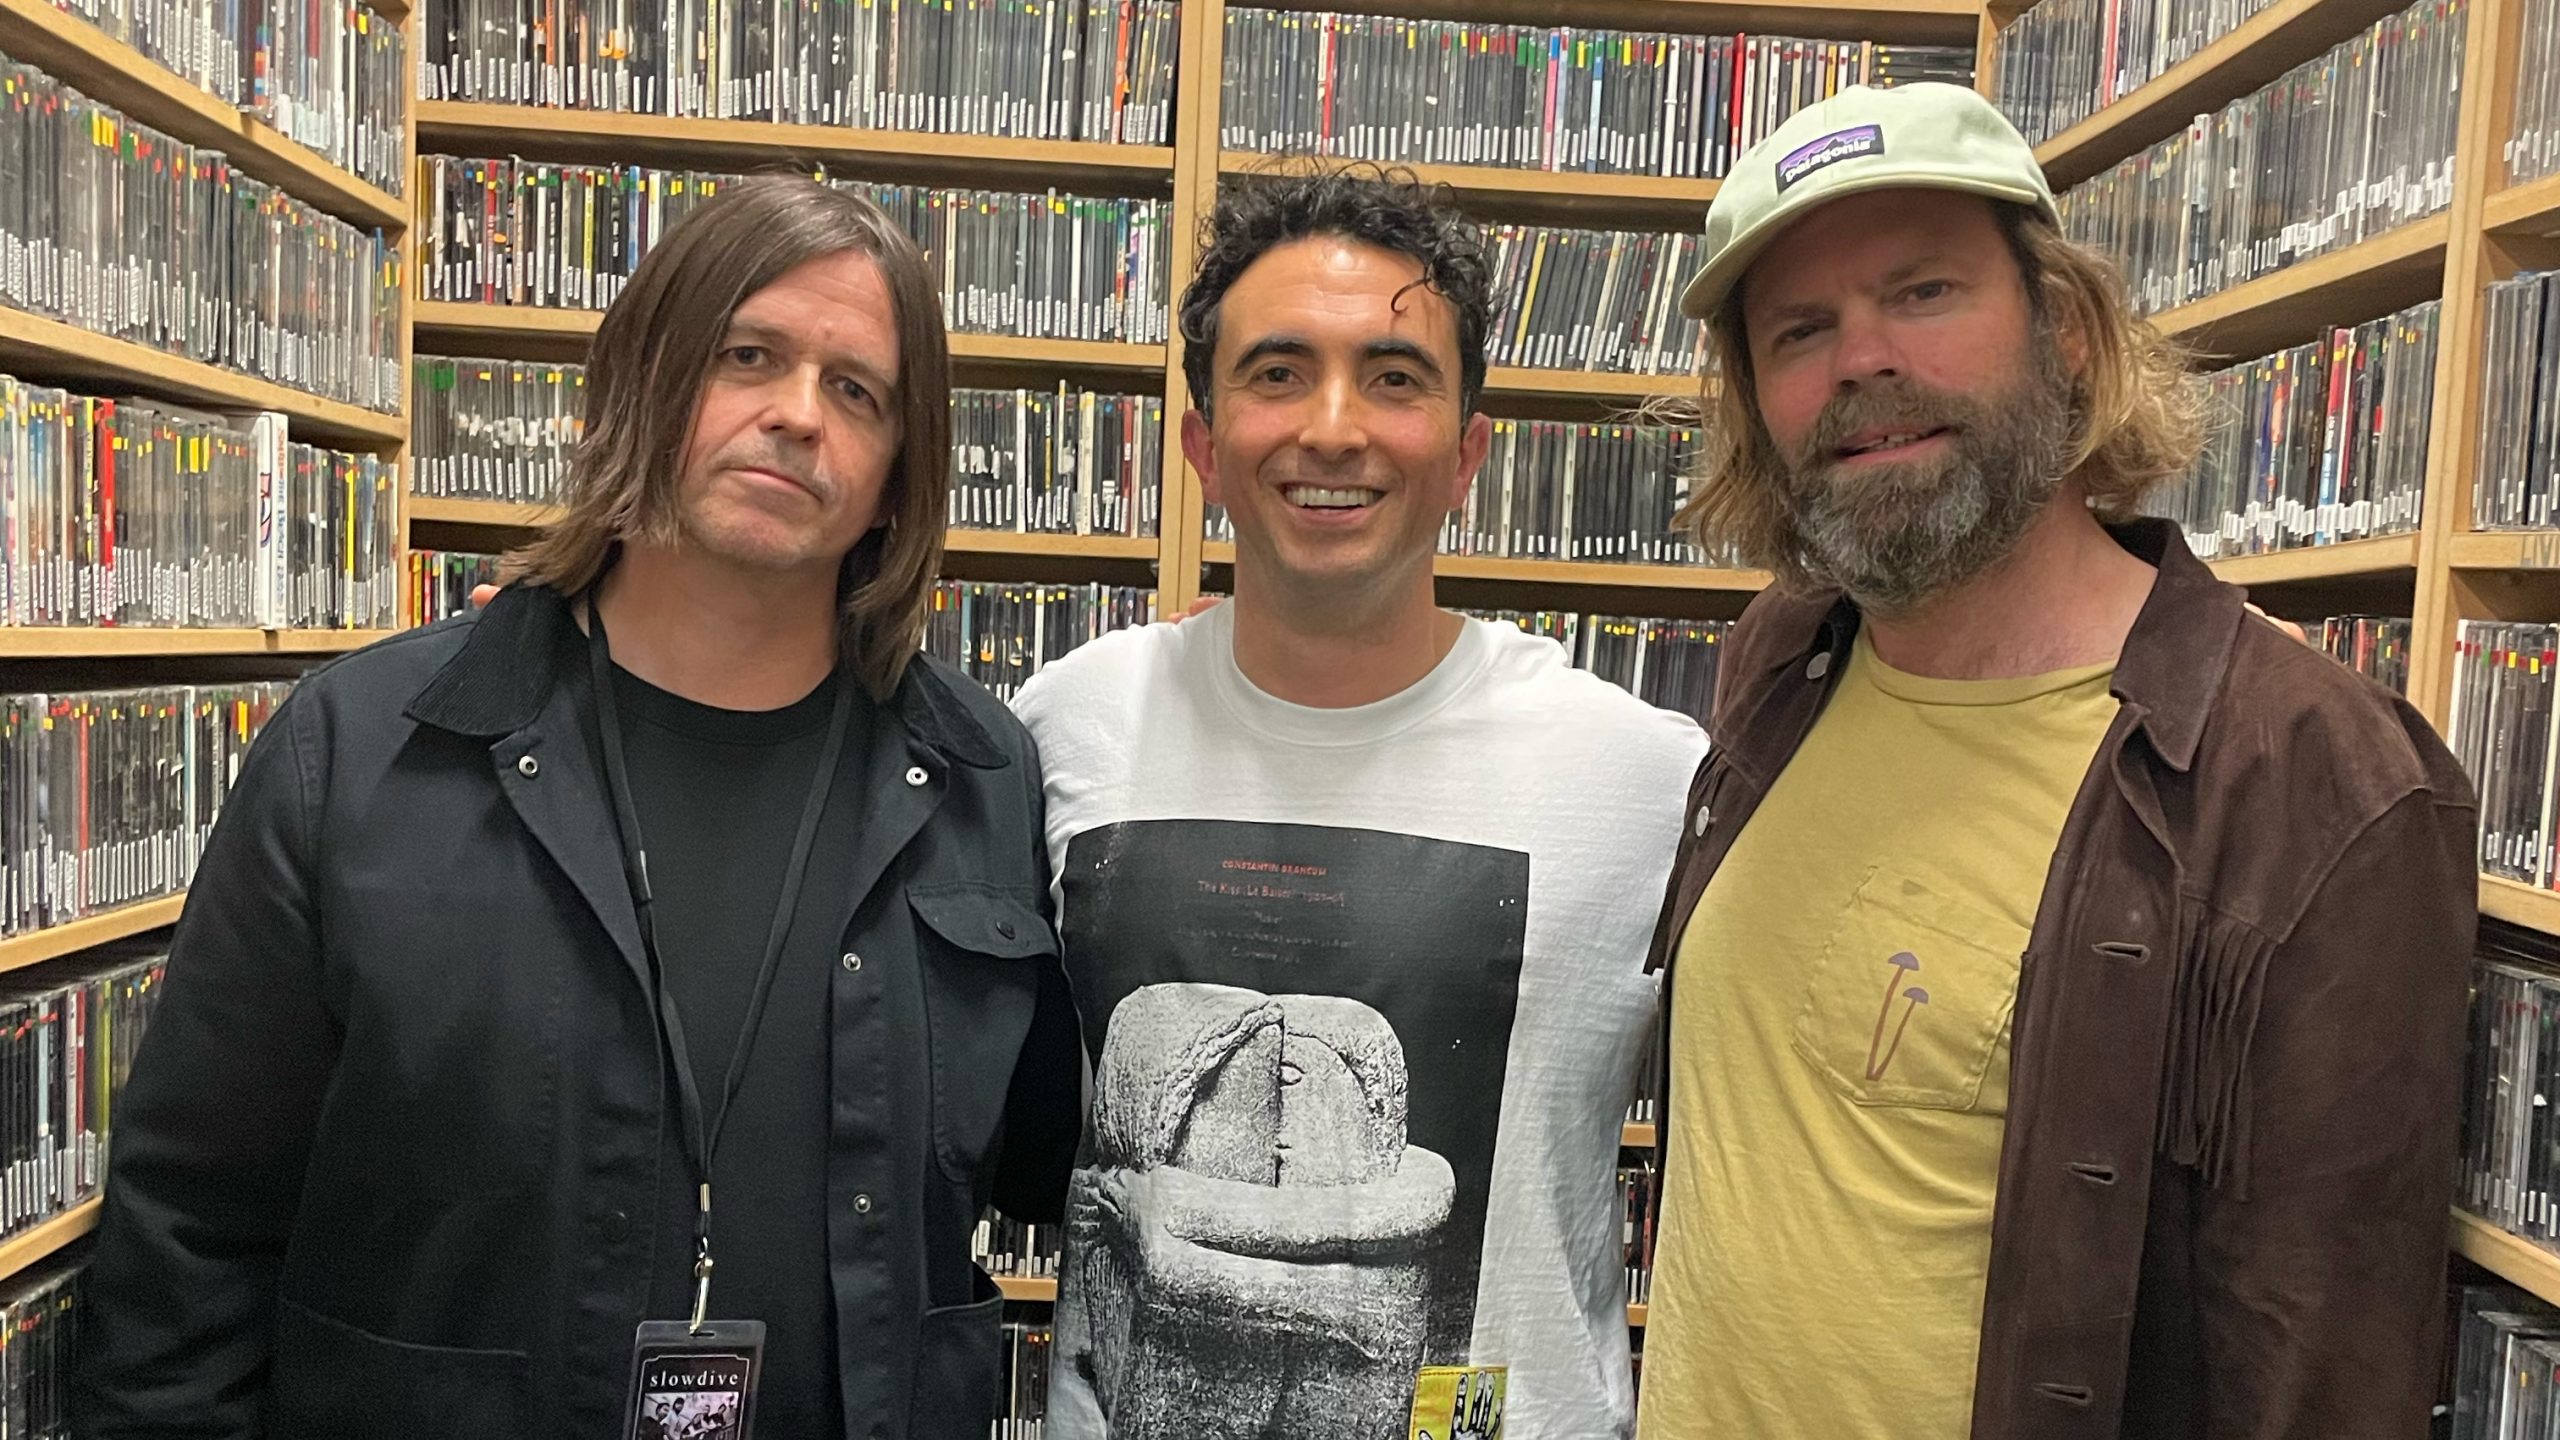 Slowdive members Neil and Simon stand next in the FBi CD library room, with presetner Al Grigg in between them. All three are facing the camera for a photo.